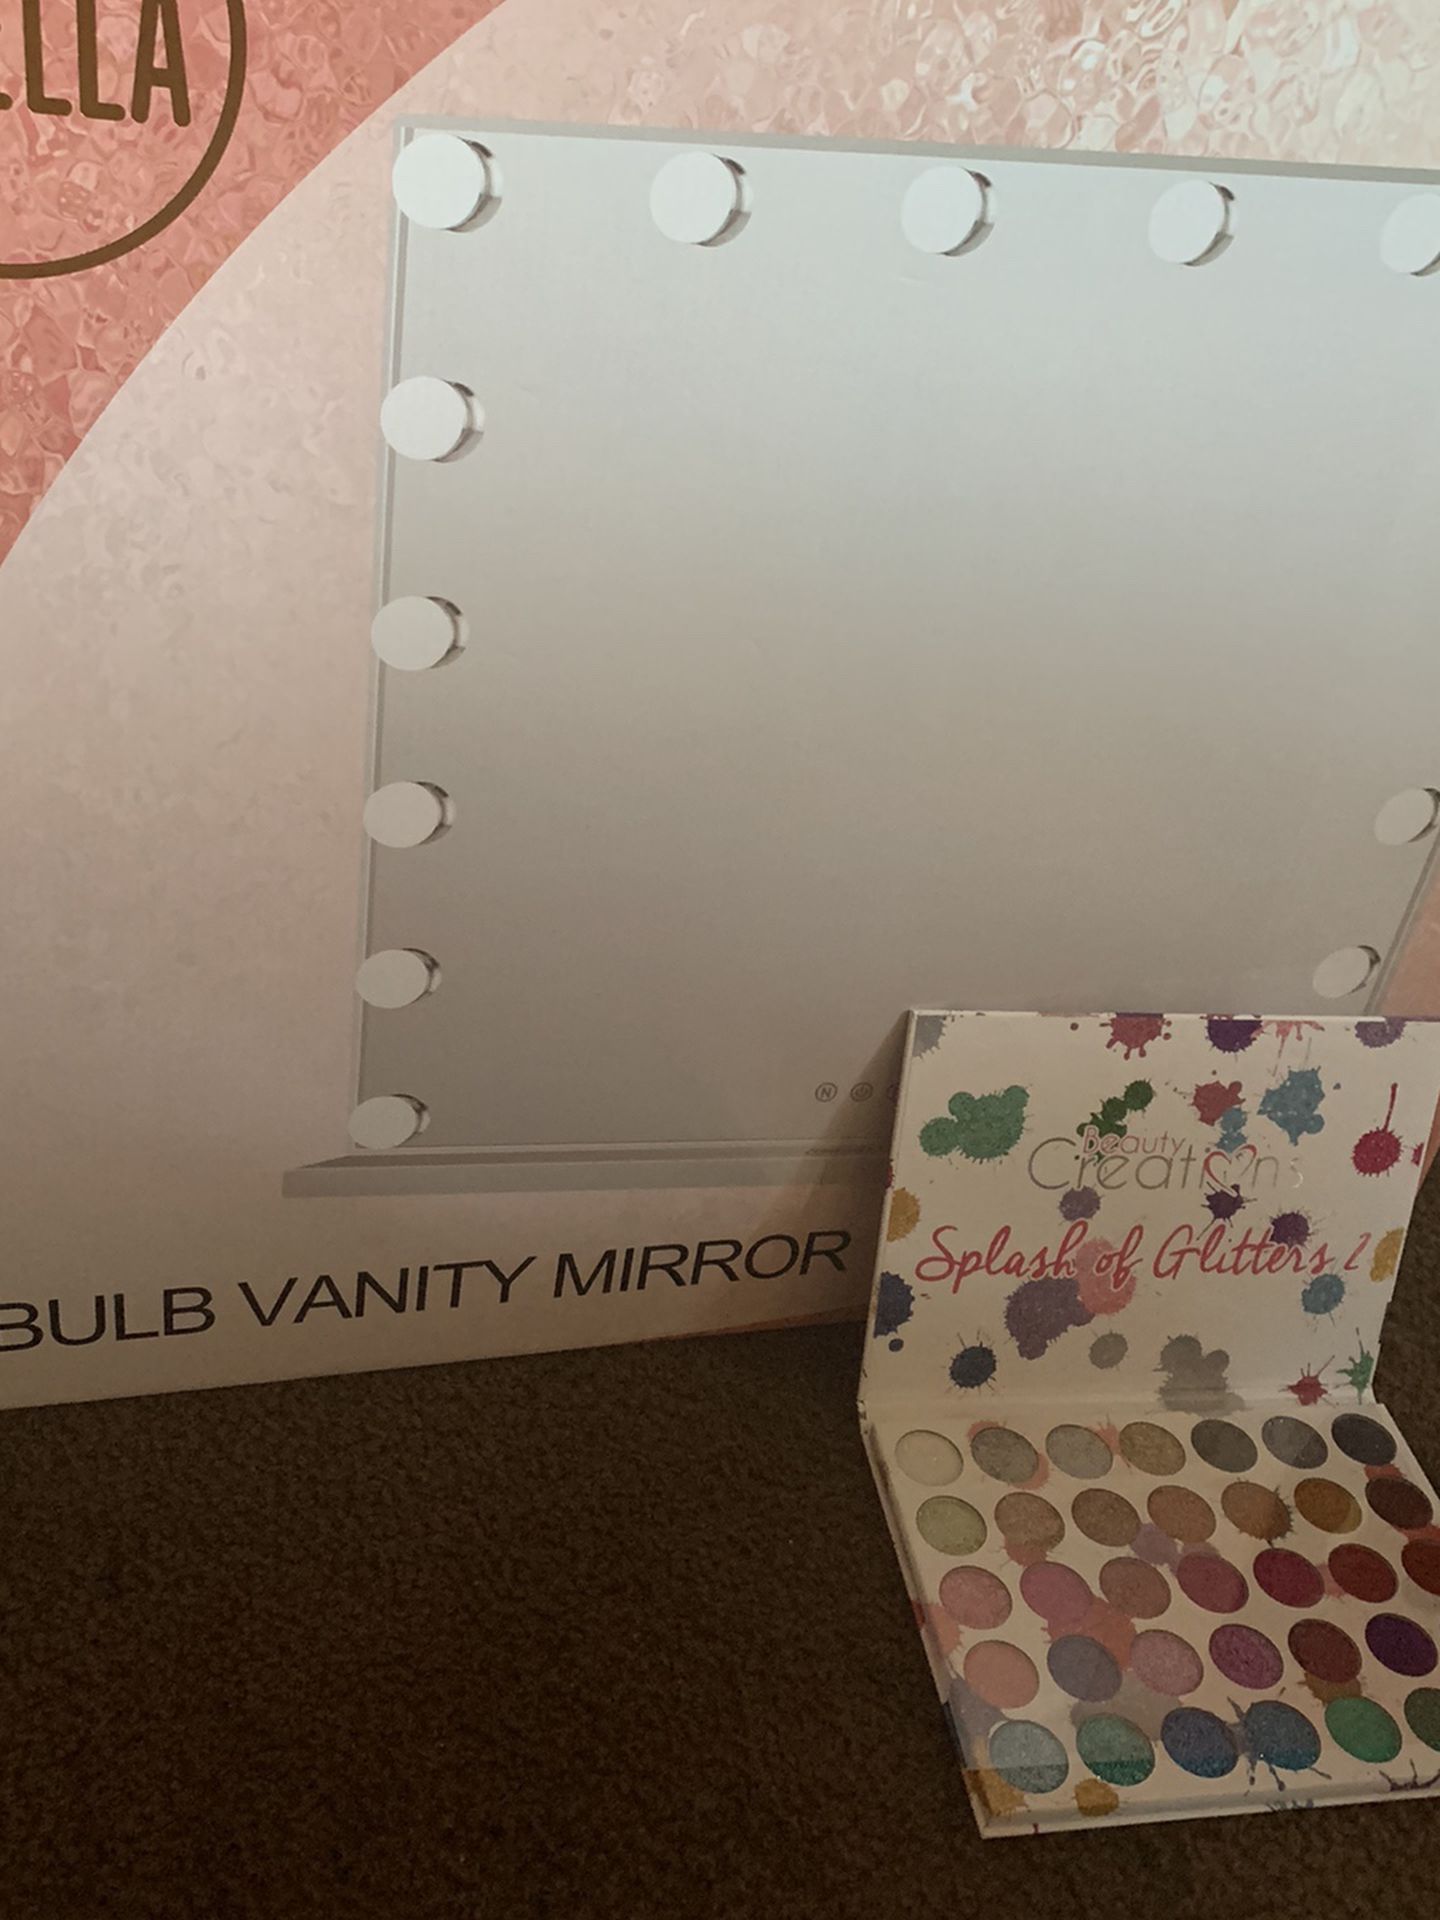 Vanity Miorr With A Free Beauty Creations Pallet